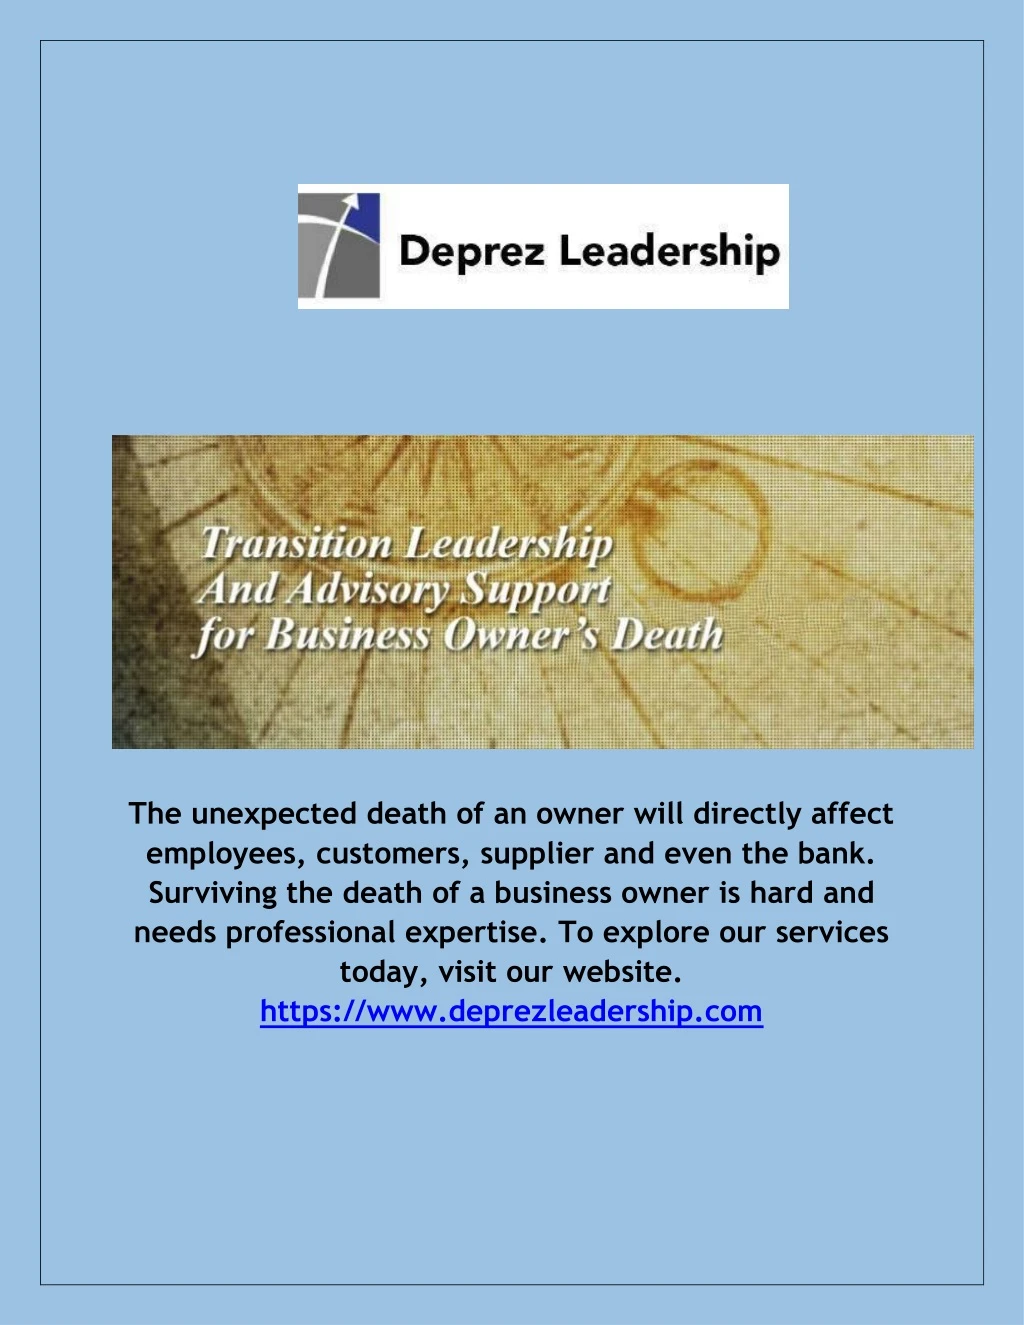 the unexpected death of an owner will directly